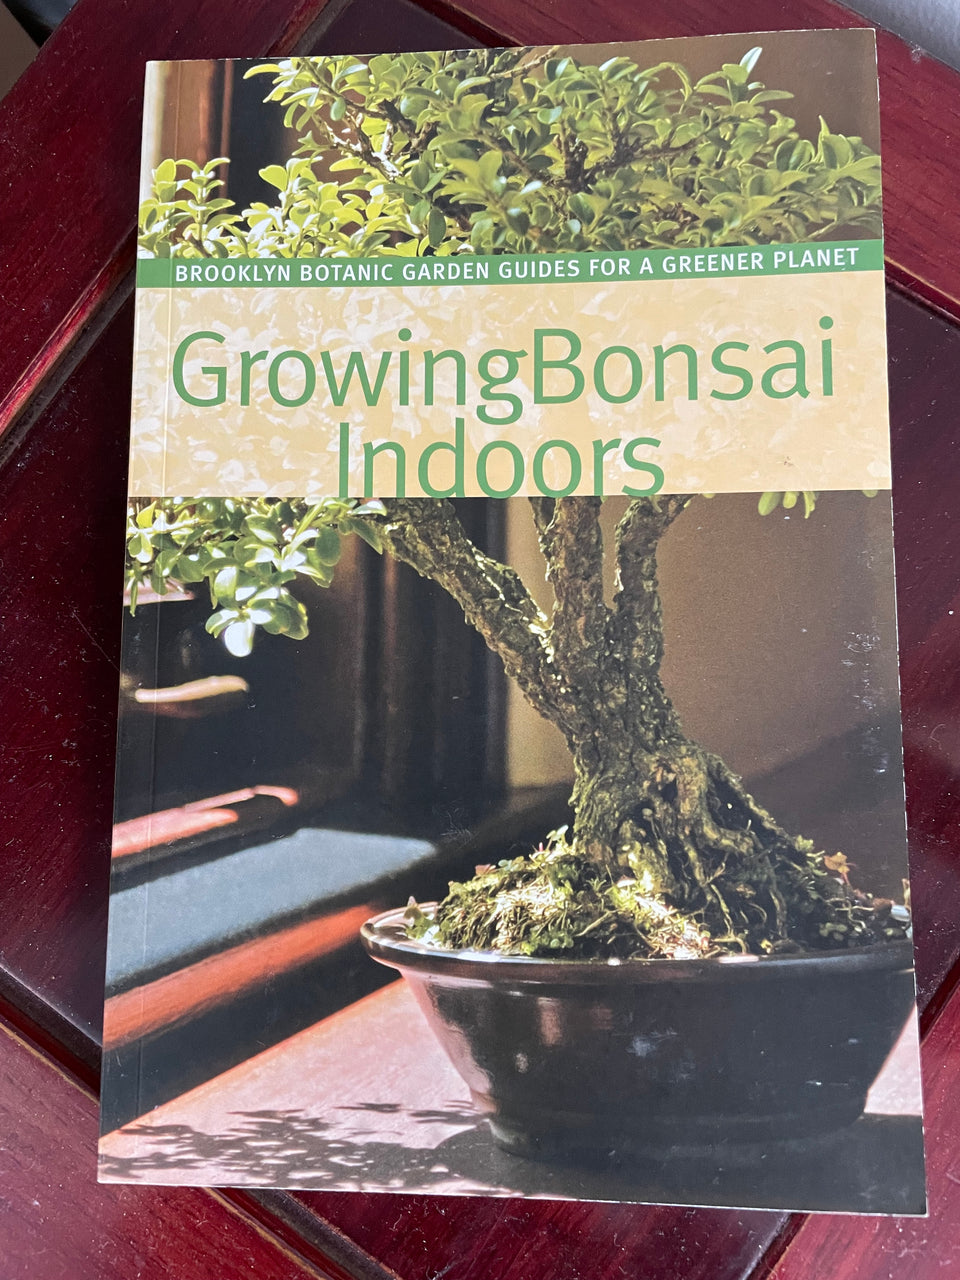 Growing Bonsai Indoors Edited by Pat Lucke Morris and Sigrun Wolff Saphire